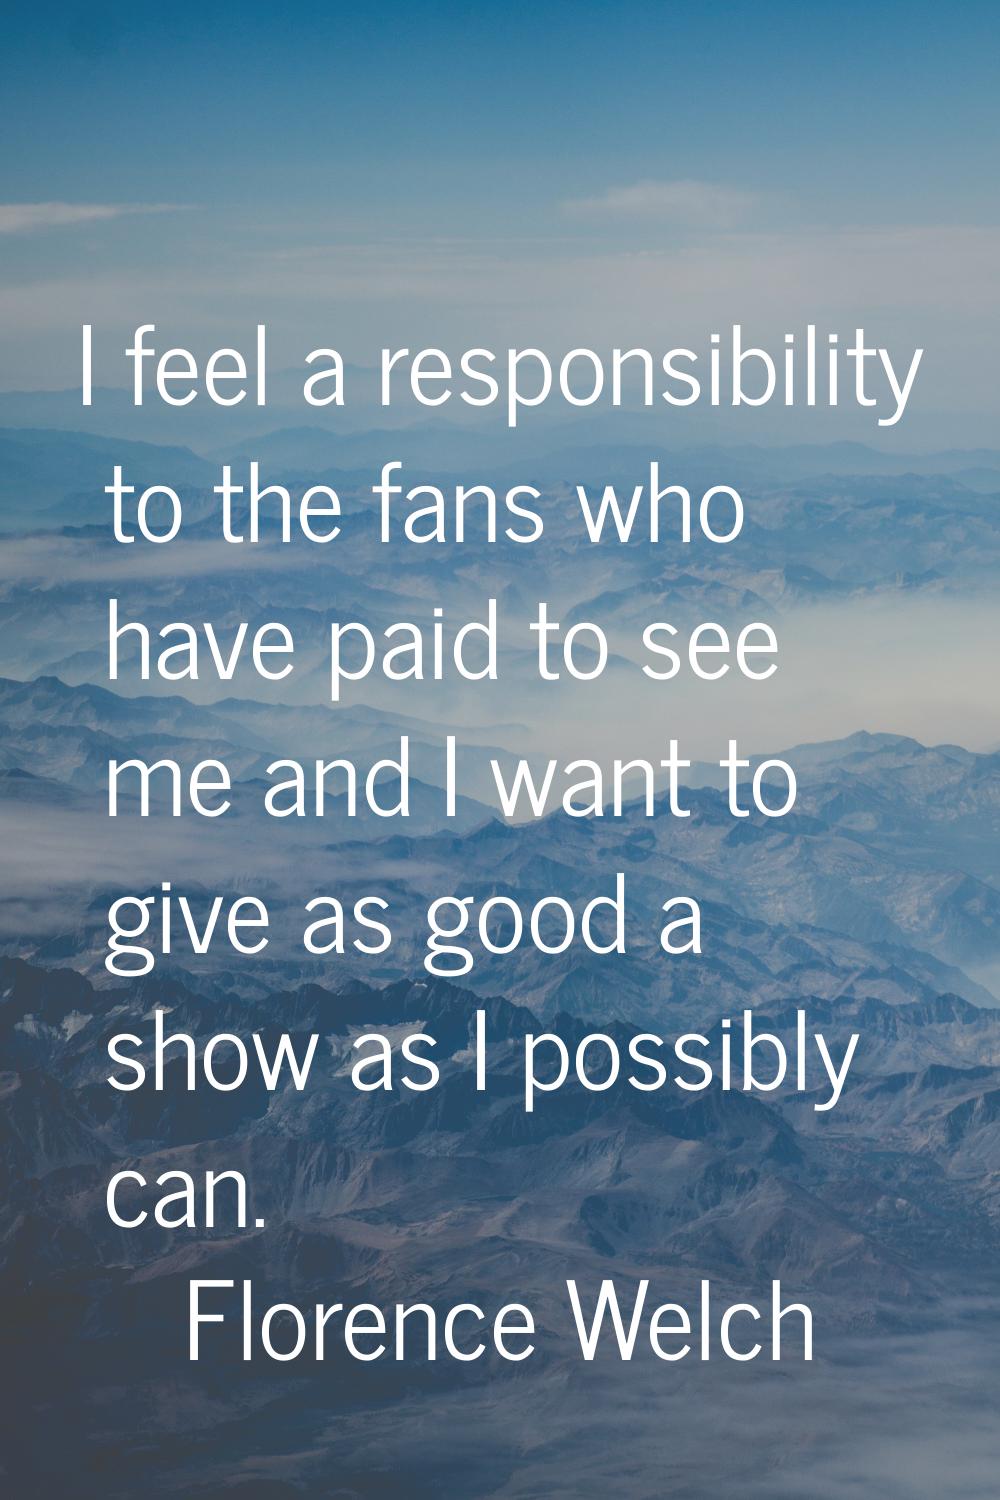 I feel a responsibility to the fans who have paid to see me and I want to give as good a show as I 